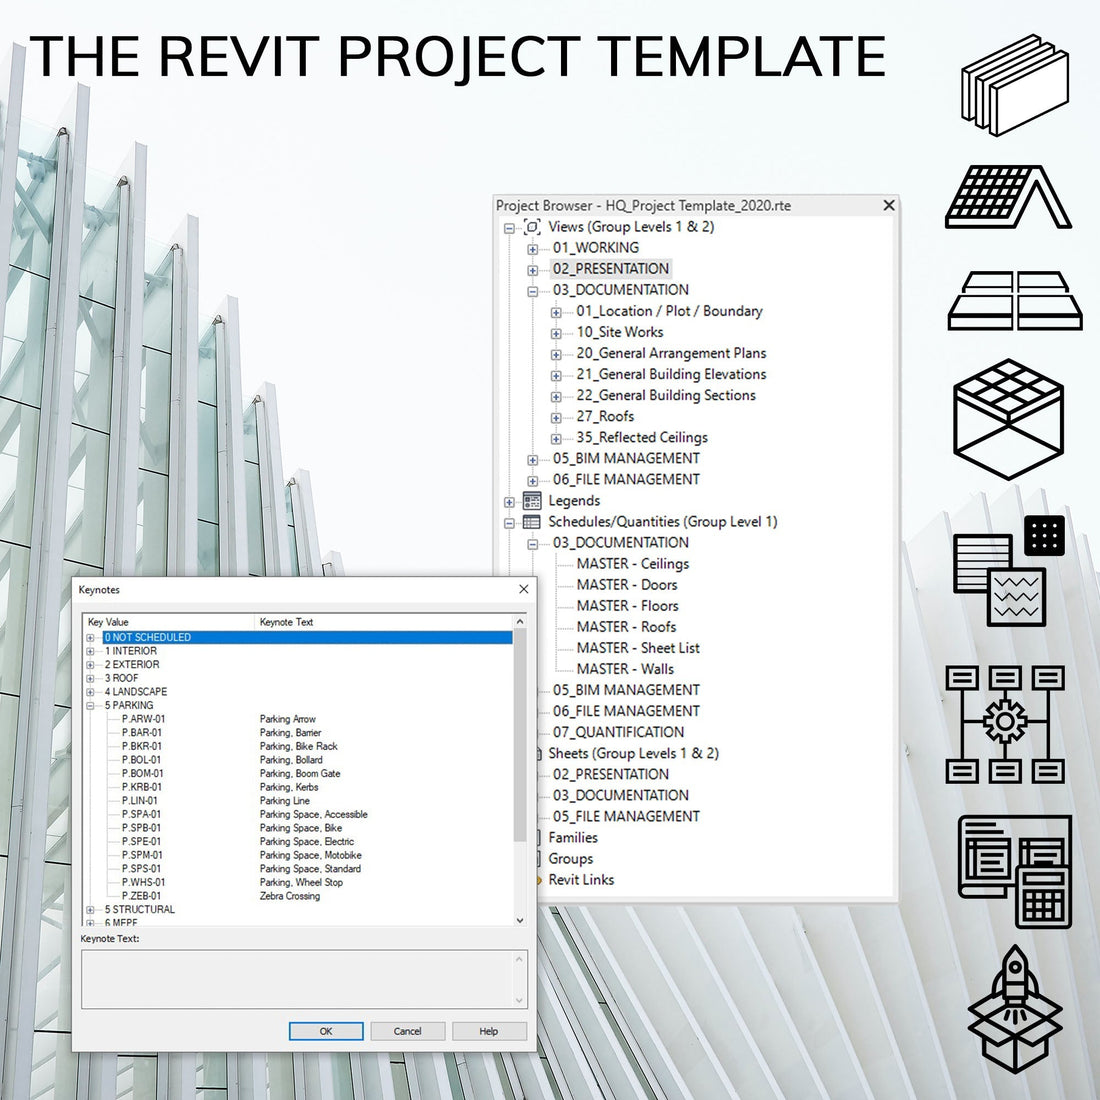 A Customized and Optimized Revit Project Template: Streamlining Your Workflow - BIMcraftHQ